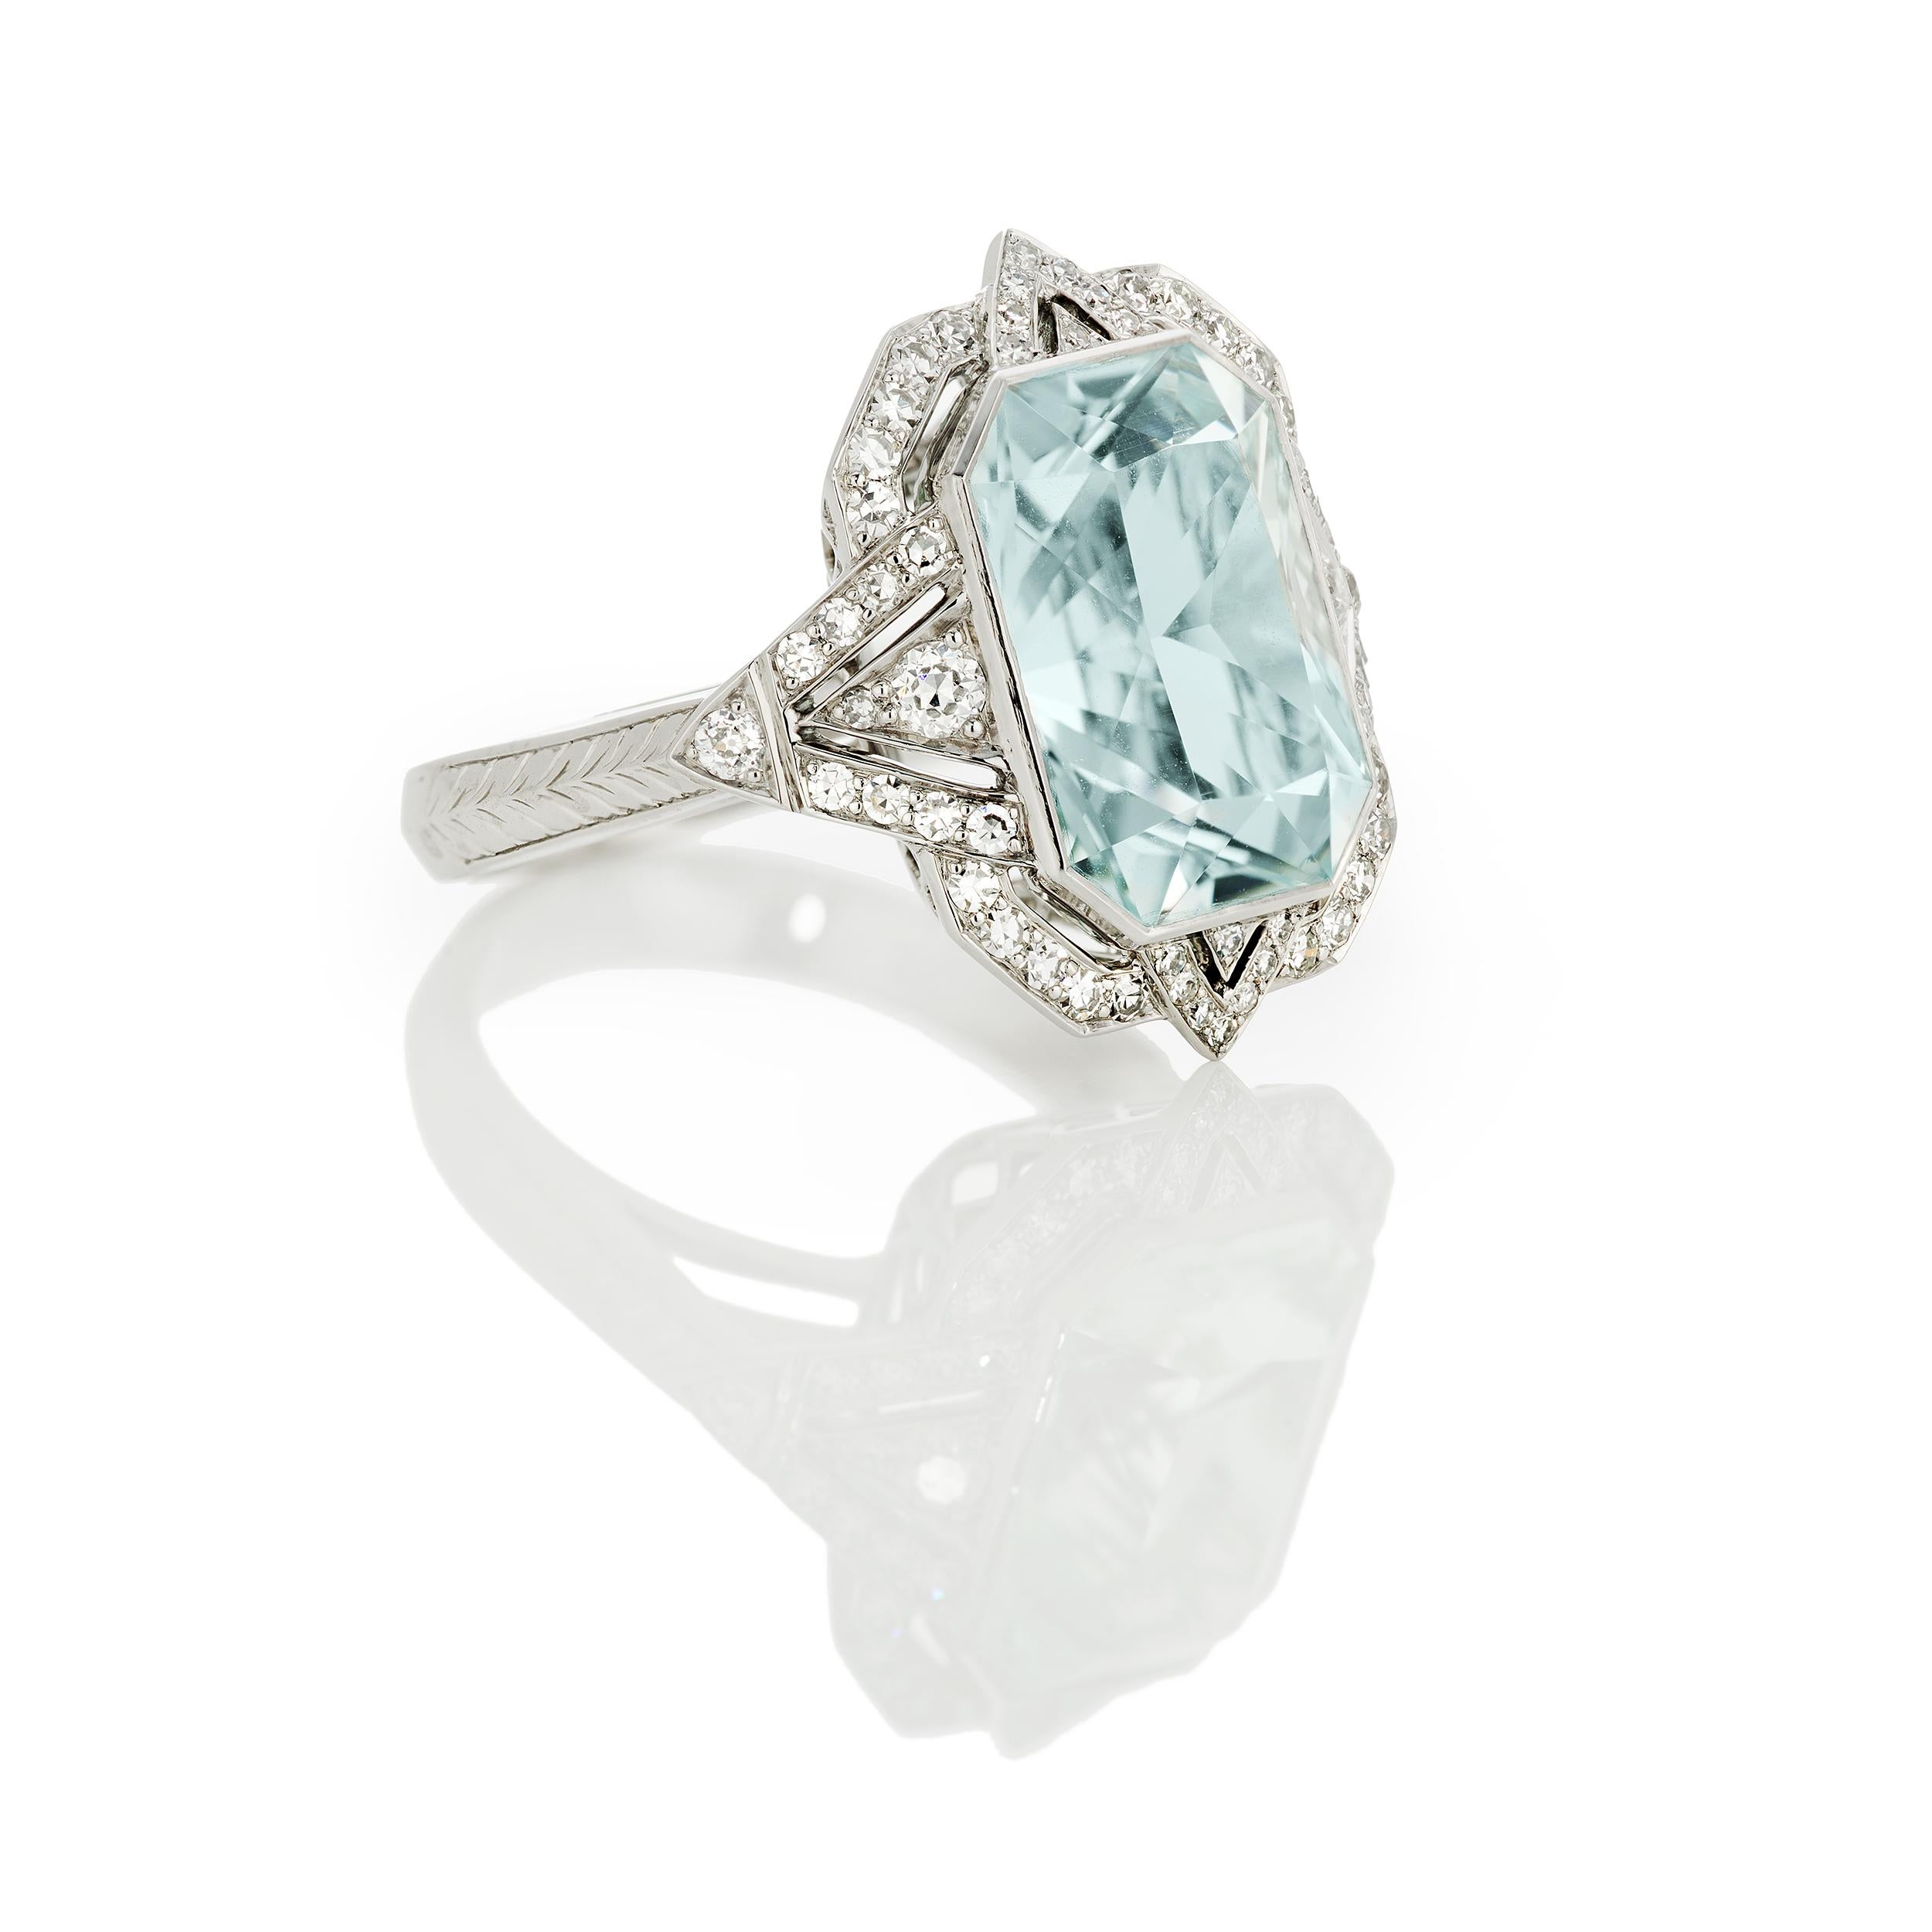 Such a lively and bright one of a kind ring.  The 5.94 Carat custom cut Radiant-shaped Aquamarine surrounded with an original design, including hand engraved details, featuring 0.45 Carats of Diamonds.  Set in Platinum 950.  Ring size 6 and can be